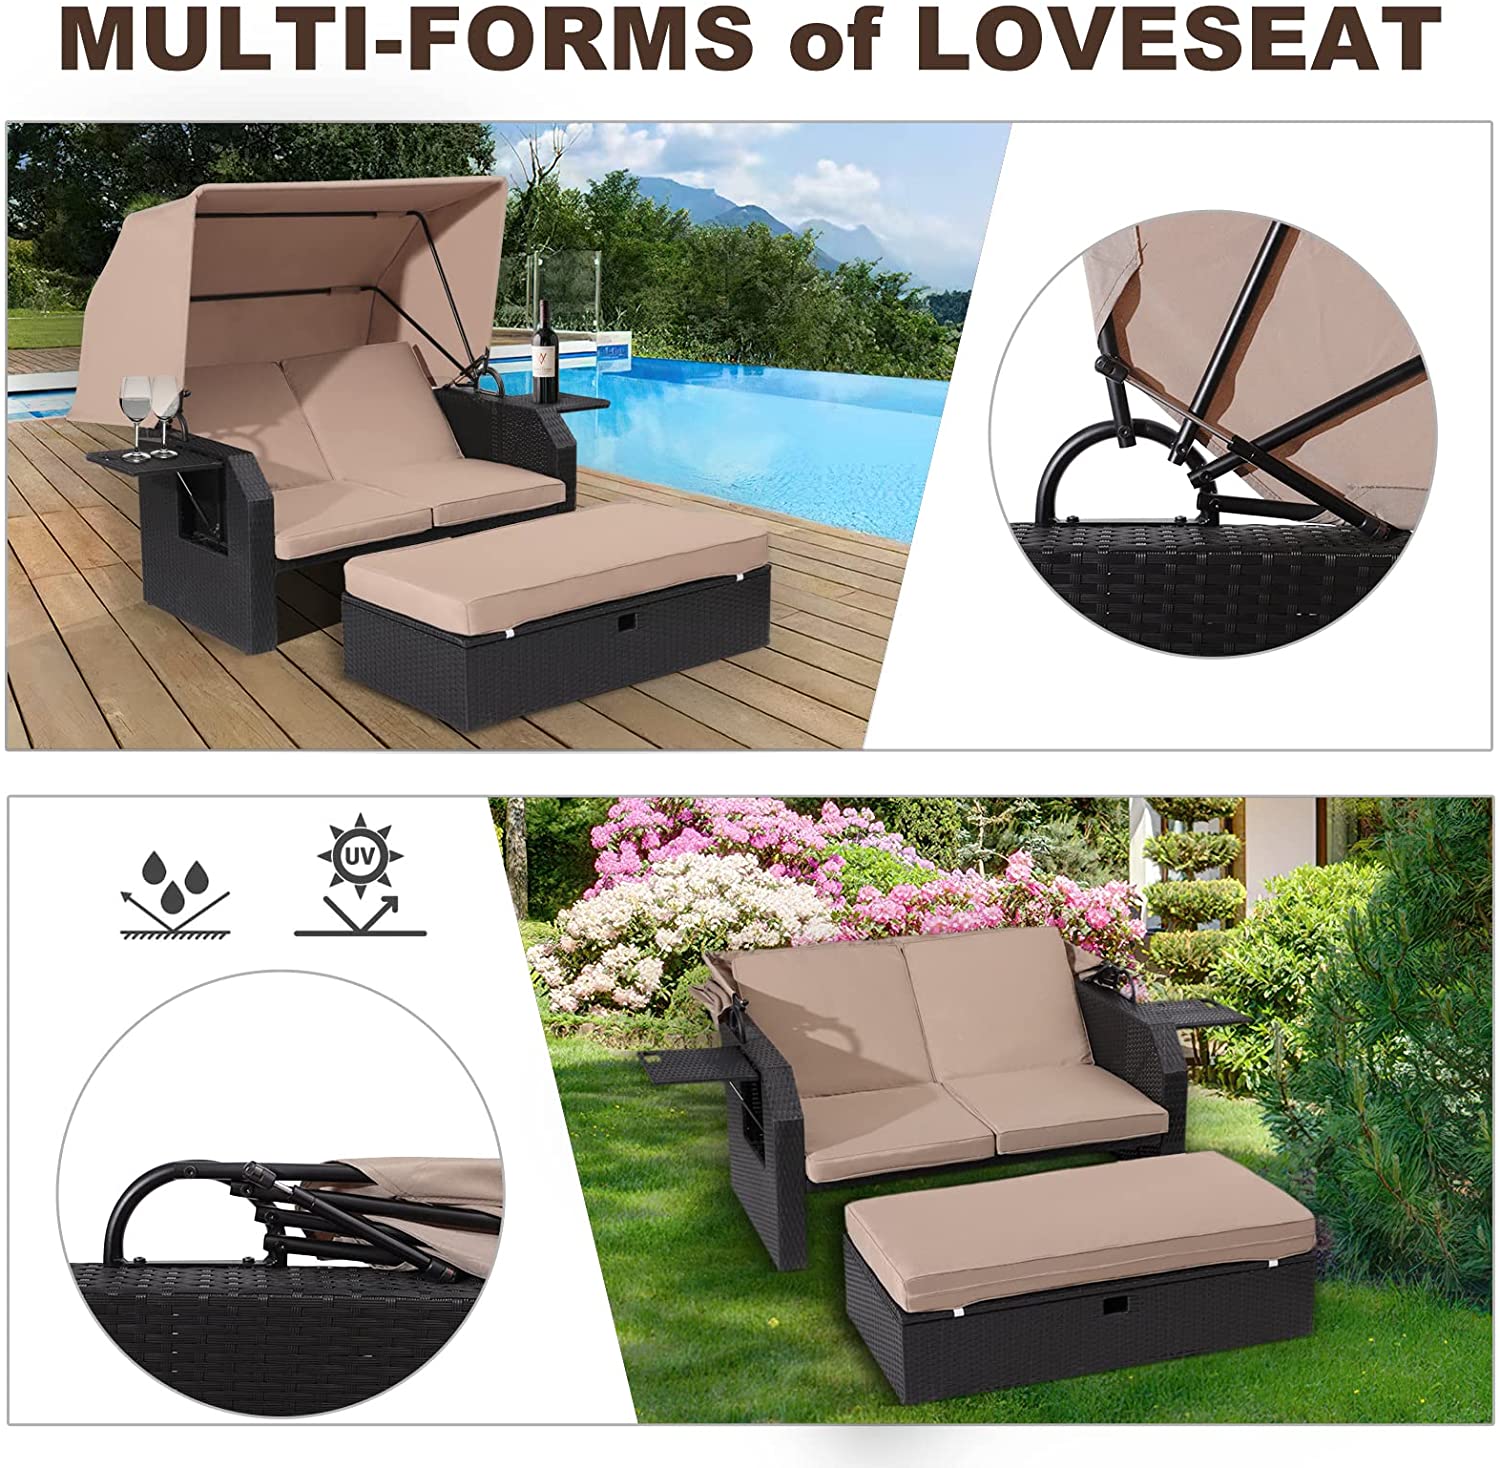 LVUYOYO Patio Wicker Furniture Set - Outdoor Rattan Sofa Set with Retractable Canopy, Side Table, Ottoman, Cushion - PE Rattan Loveseat for Backyard Porch Garden Poolside Balcony - image 4 of 7